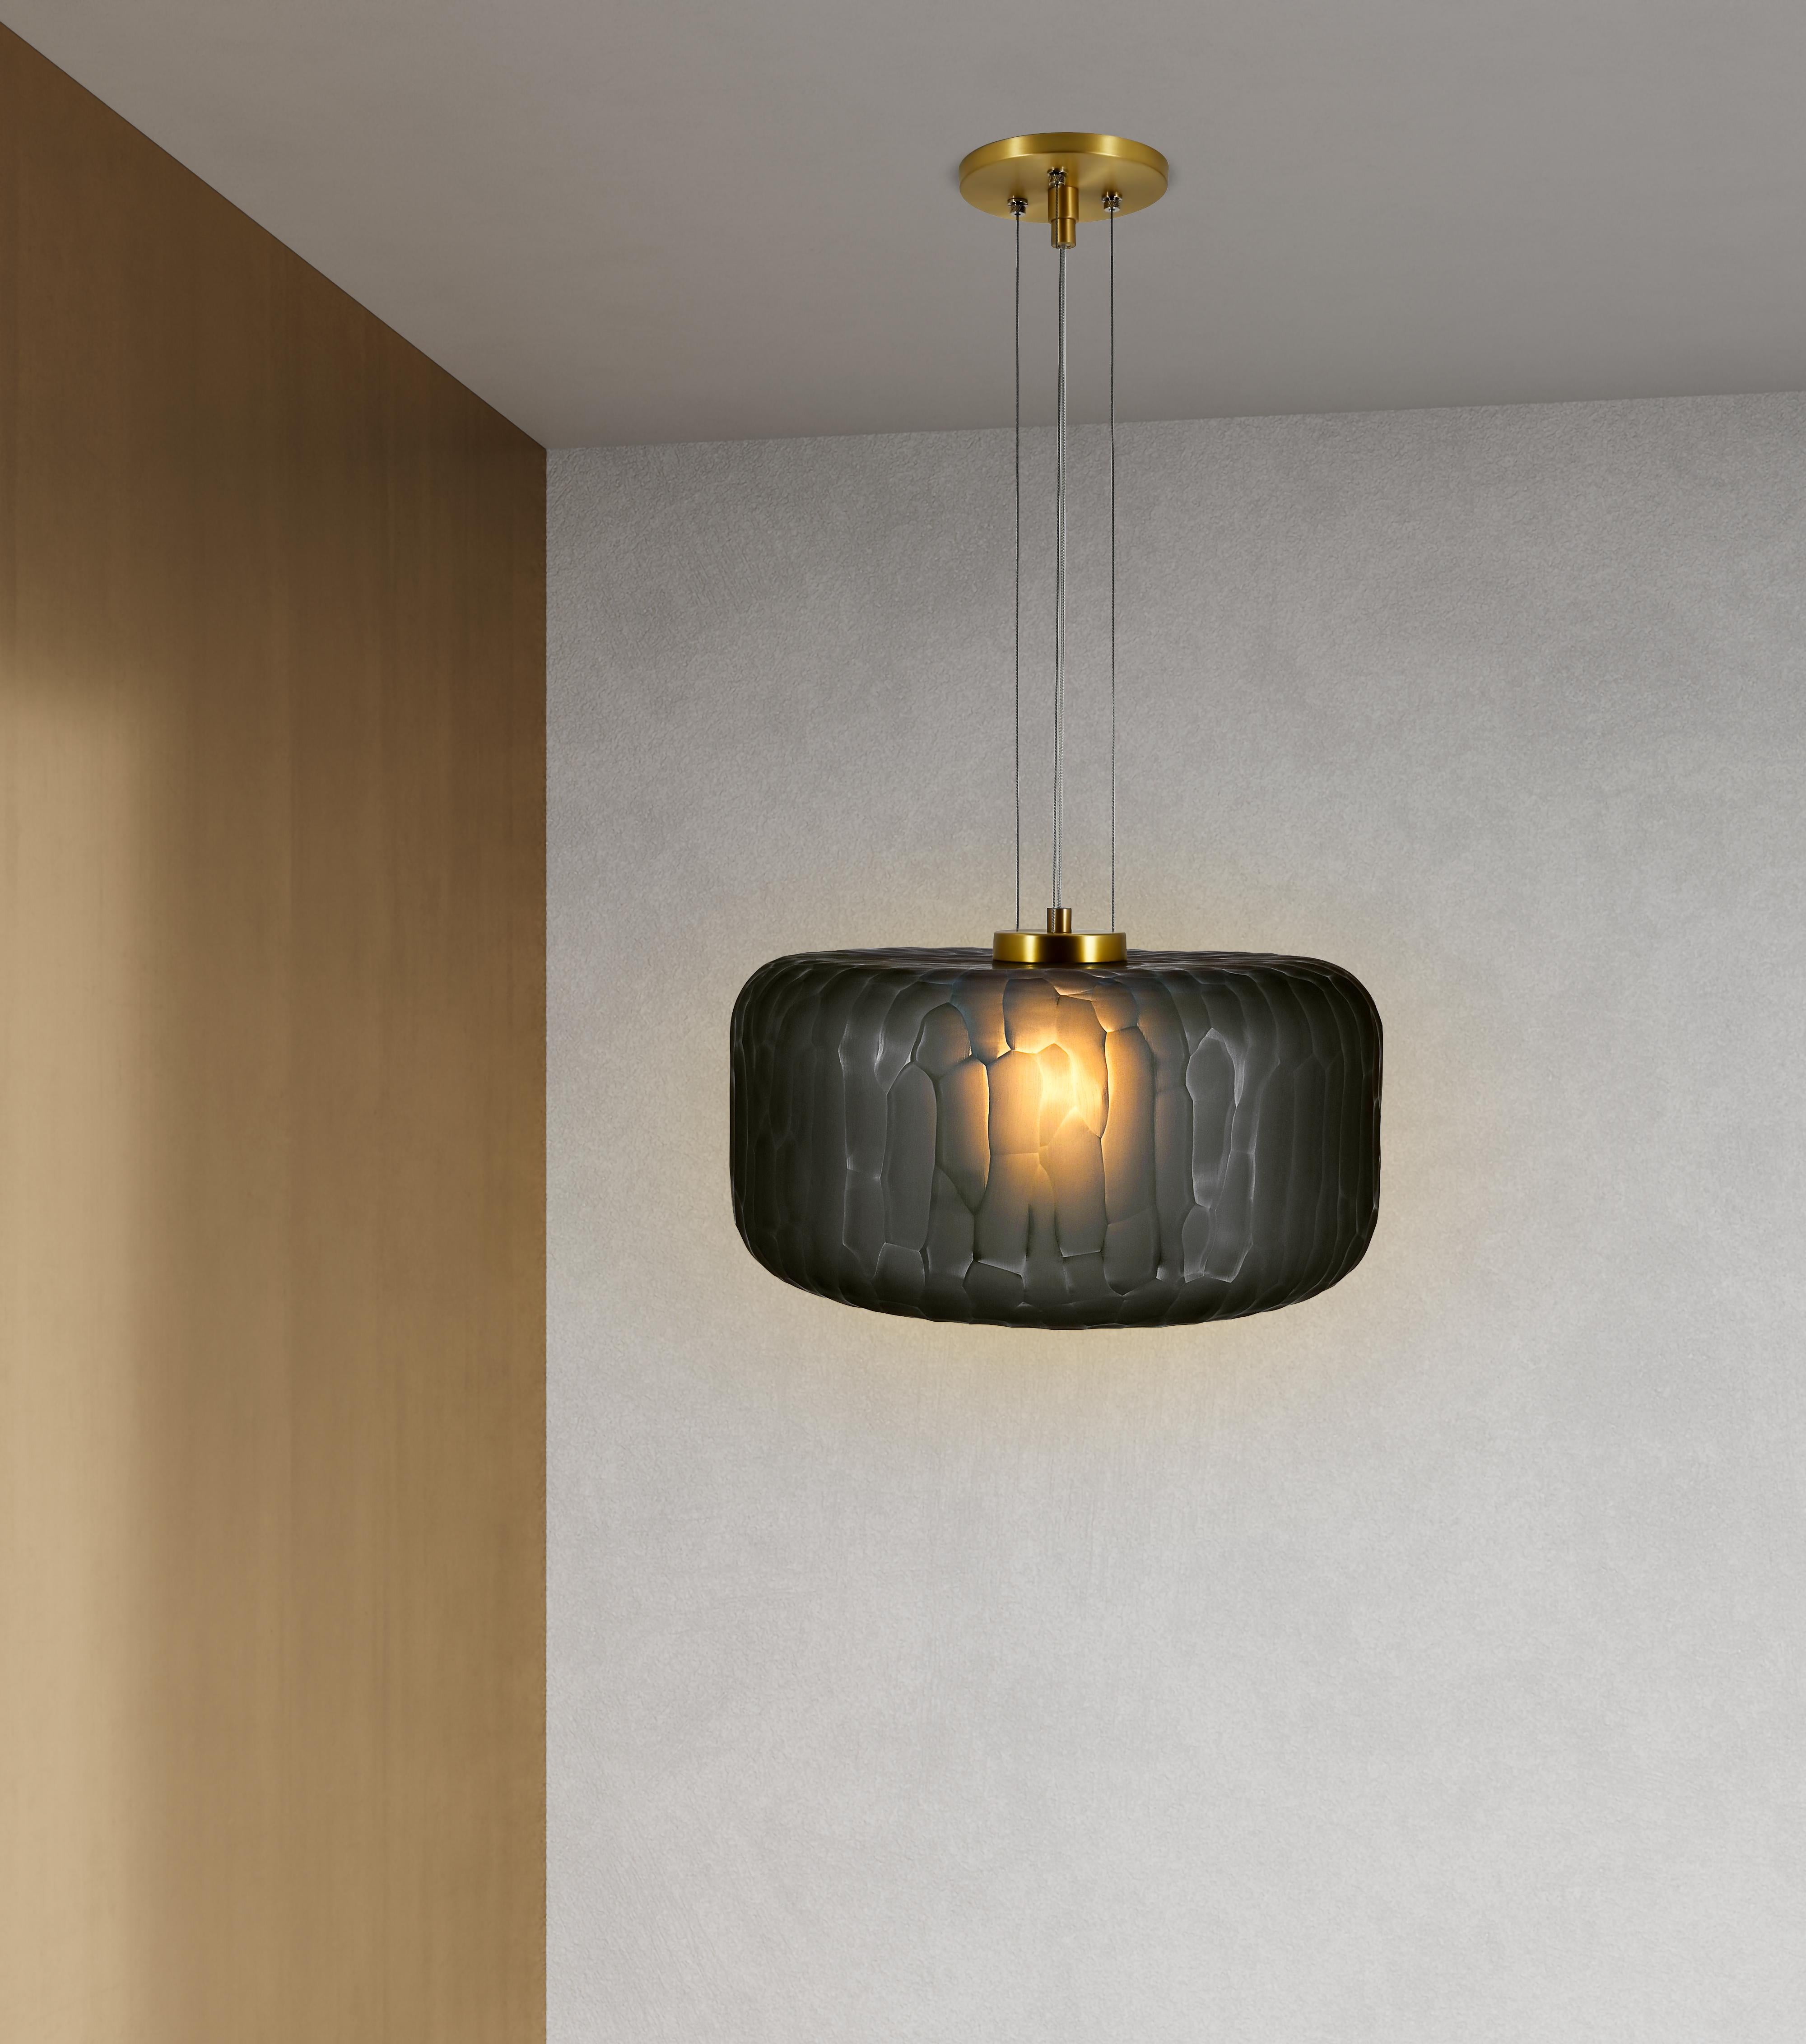 The Shereen Large pendant was designed with the expressive elegance of gemstone jewelry in mind. Bold, rounded contours with frosted, multifaceted surfaces create a remarkably exquisite sculptural piece with a rich, modern touch. Each piece is